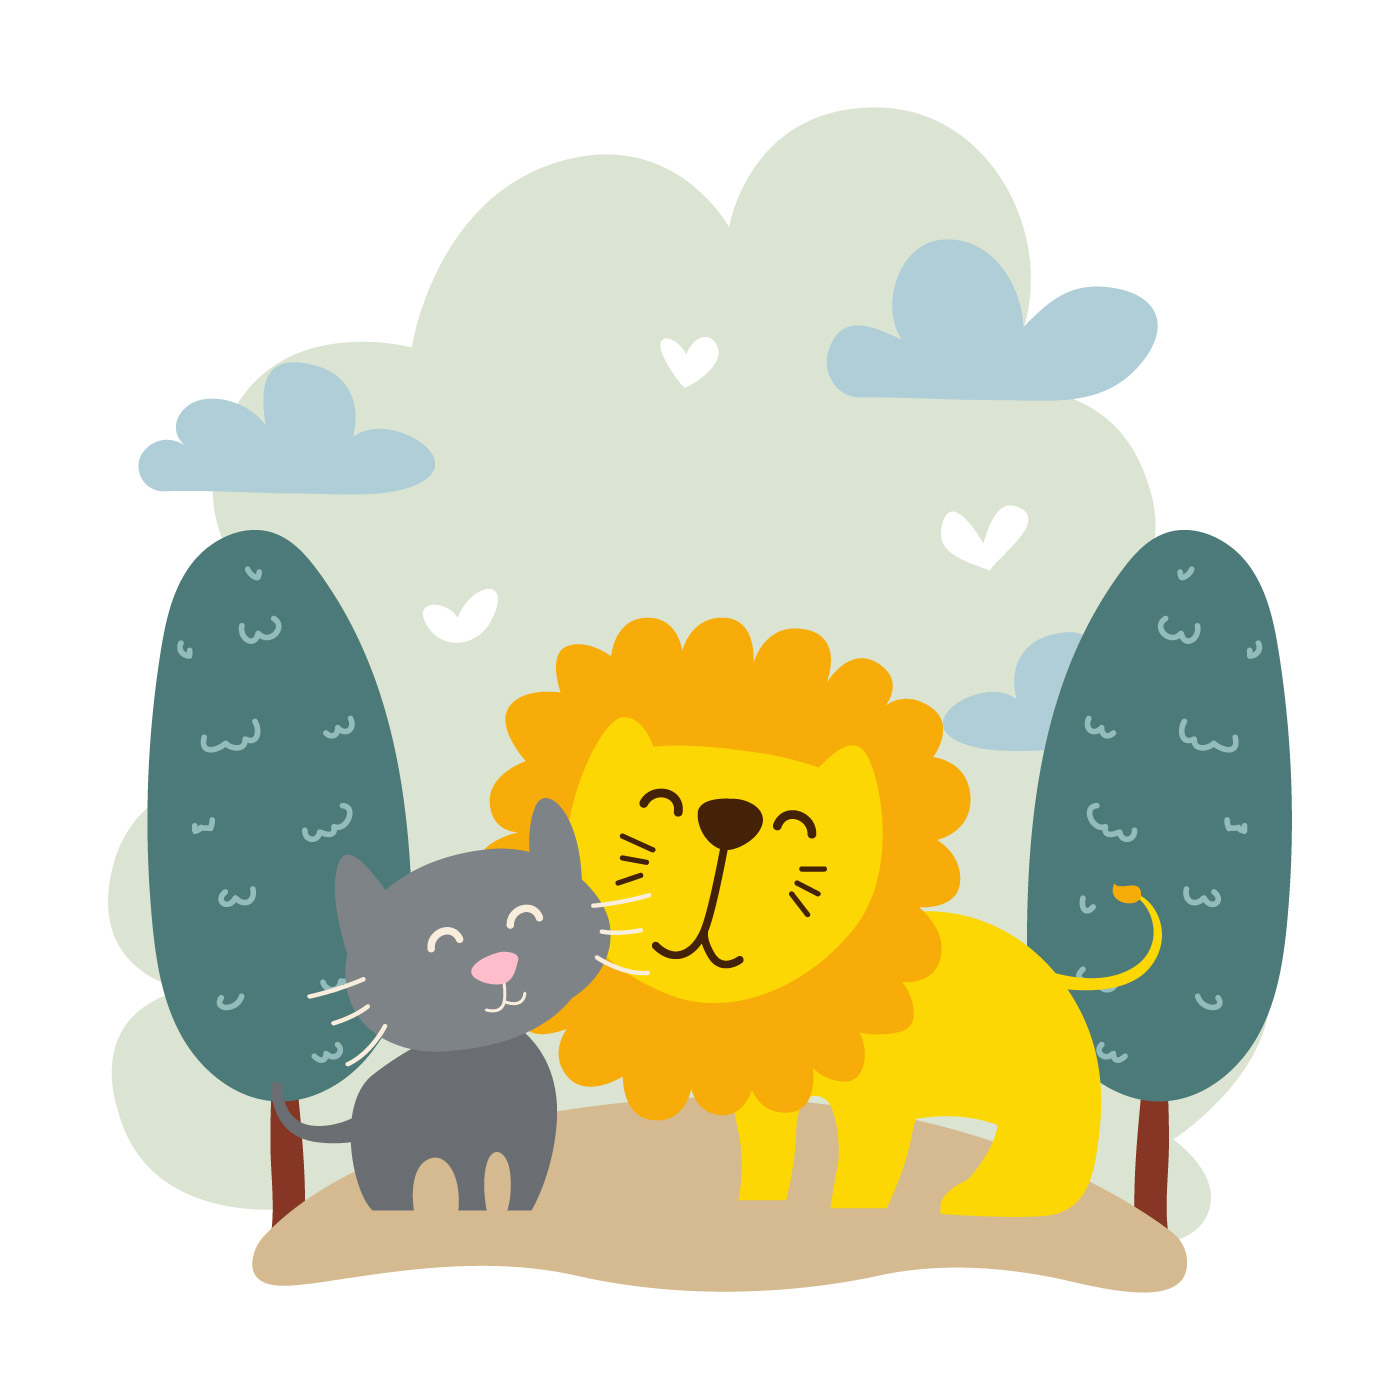 Download Animal Rescue Free Vector Art - (25 Free Downloads)